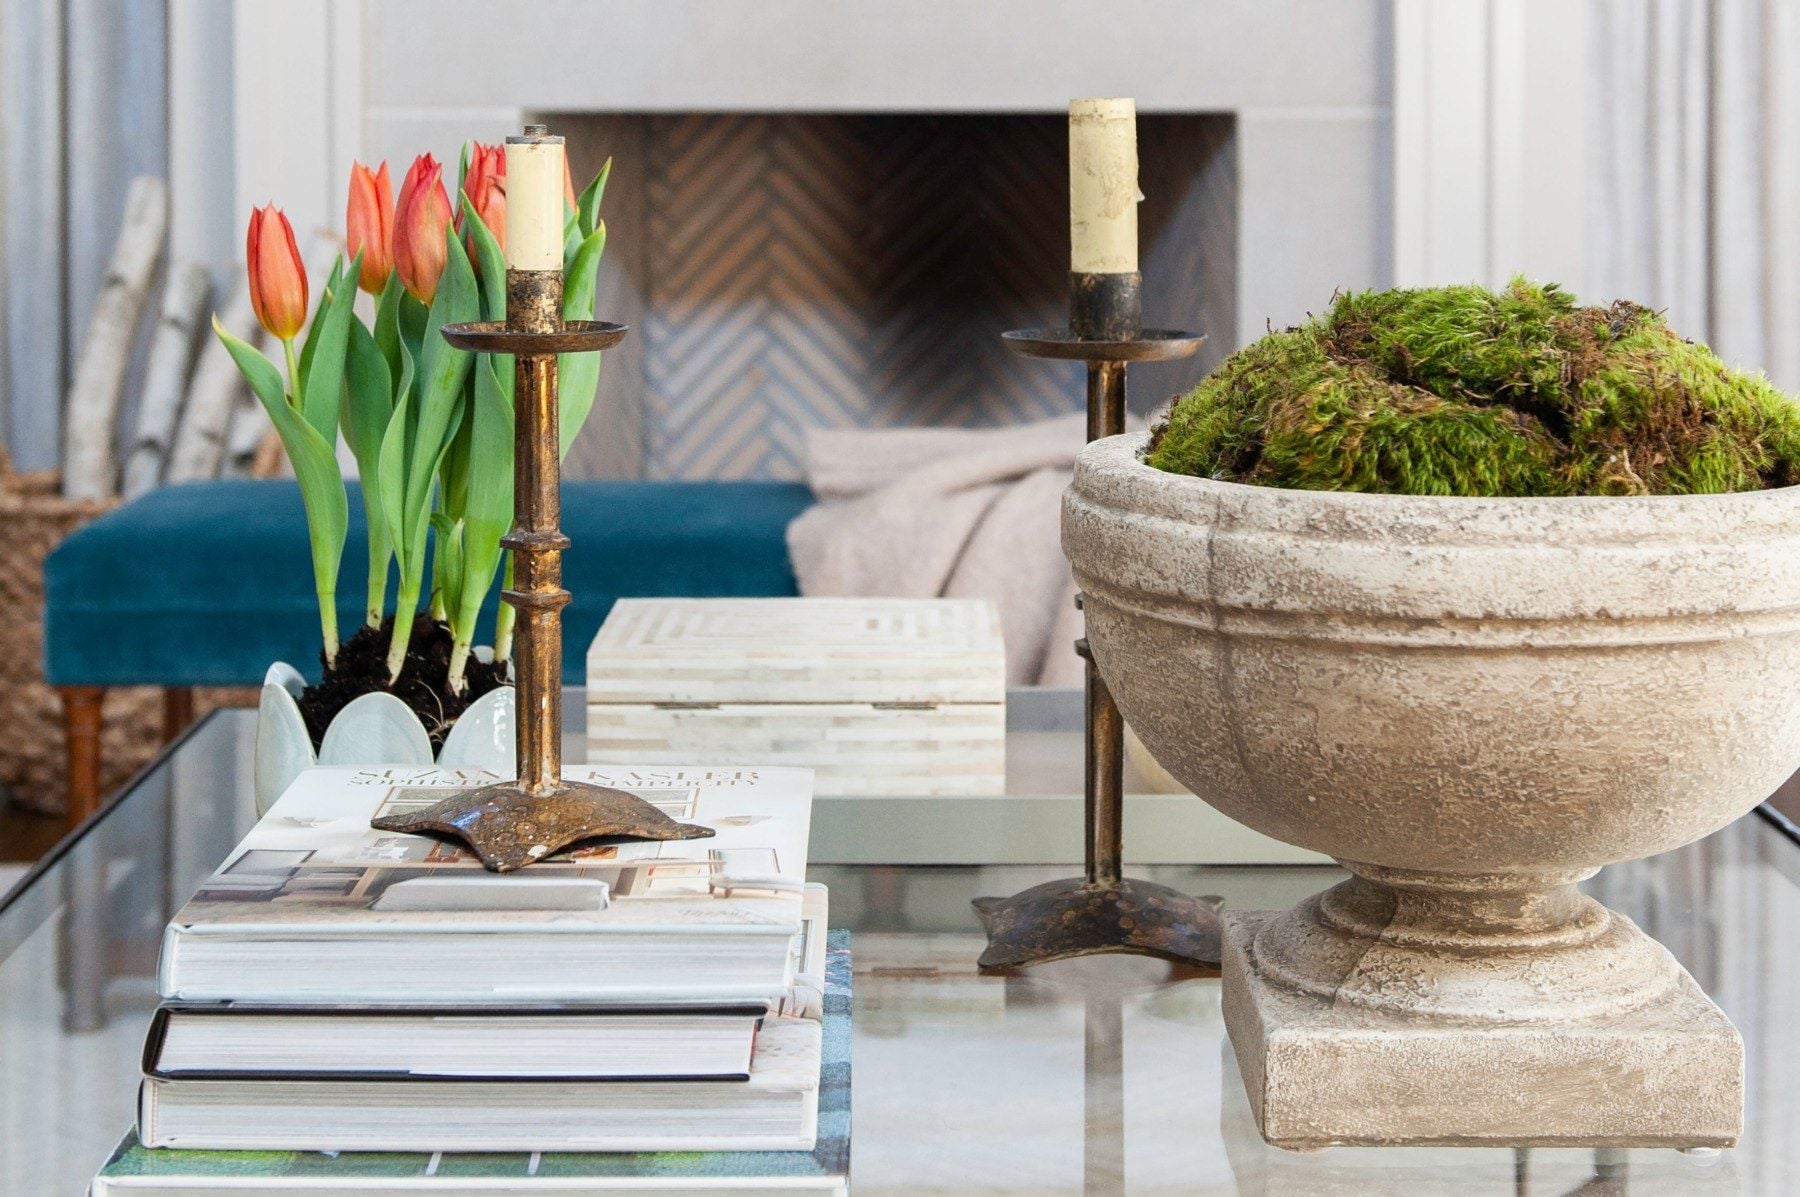 The textural contrast of this vignette (rough stone bowl, metallic candlesticks, thick paper books) can't help but draw the eye towards the scene.